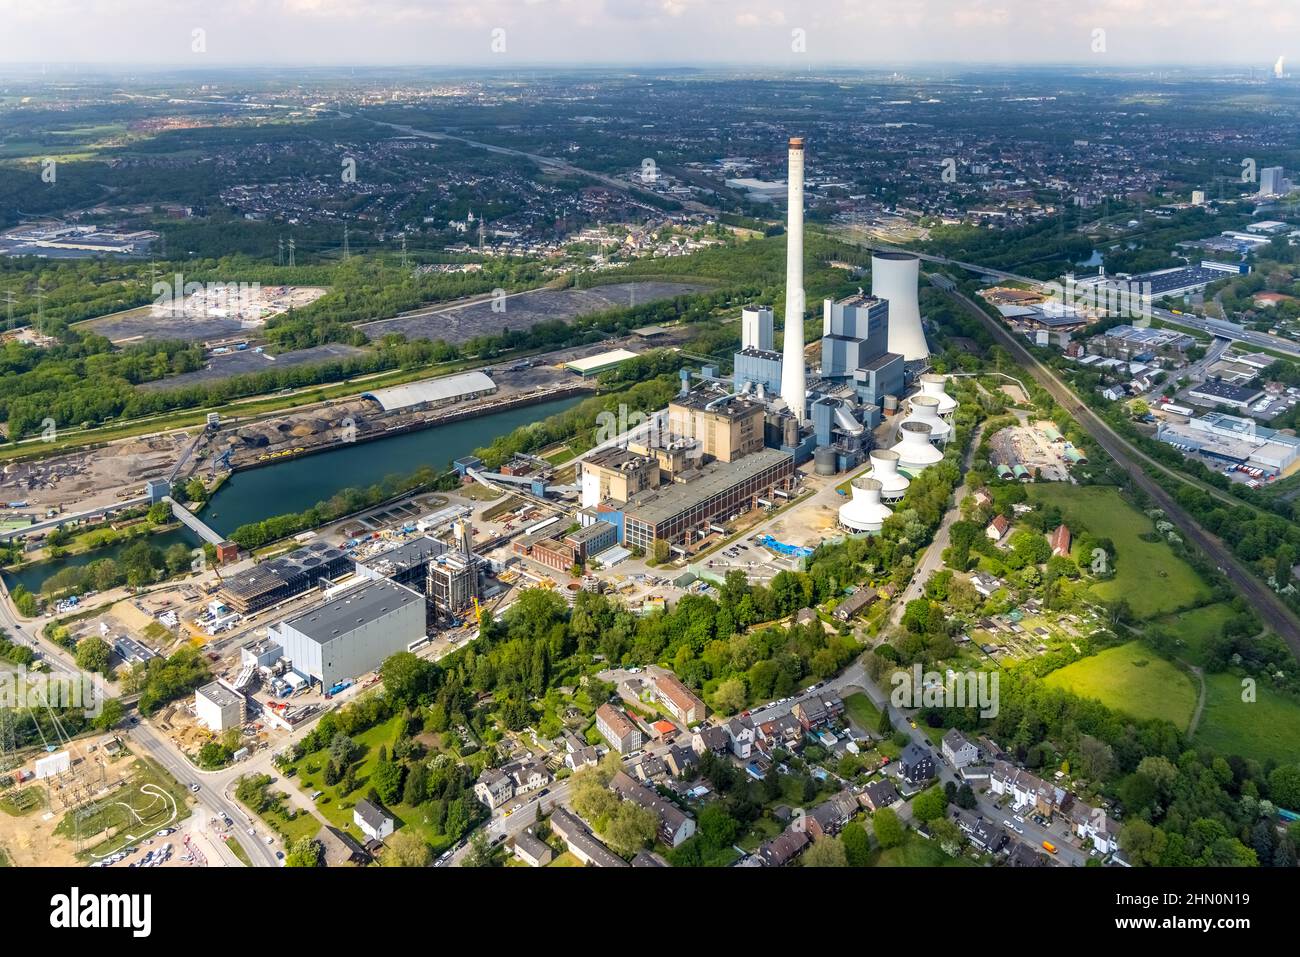 Aerial photograph, STEAG combined heat and power plant Herne, at STEAG Kraftwerke Herne, construction site new gas and steam power plant, Baukau-West, Stock Photo